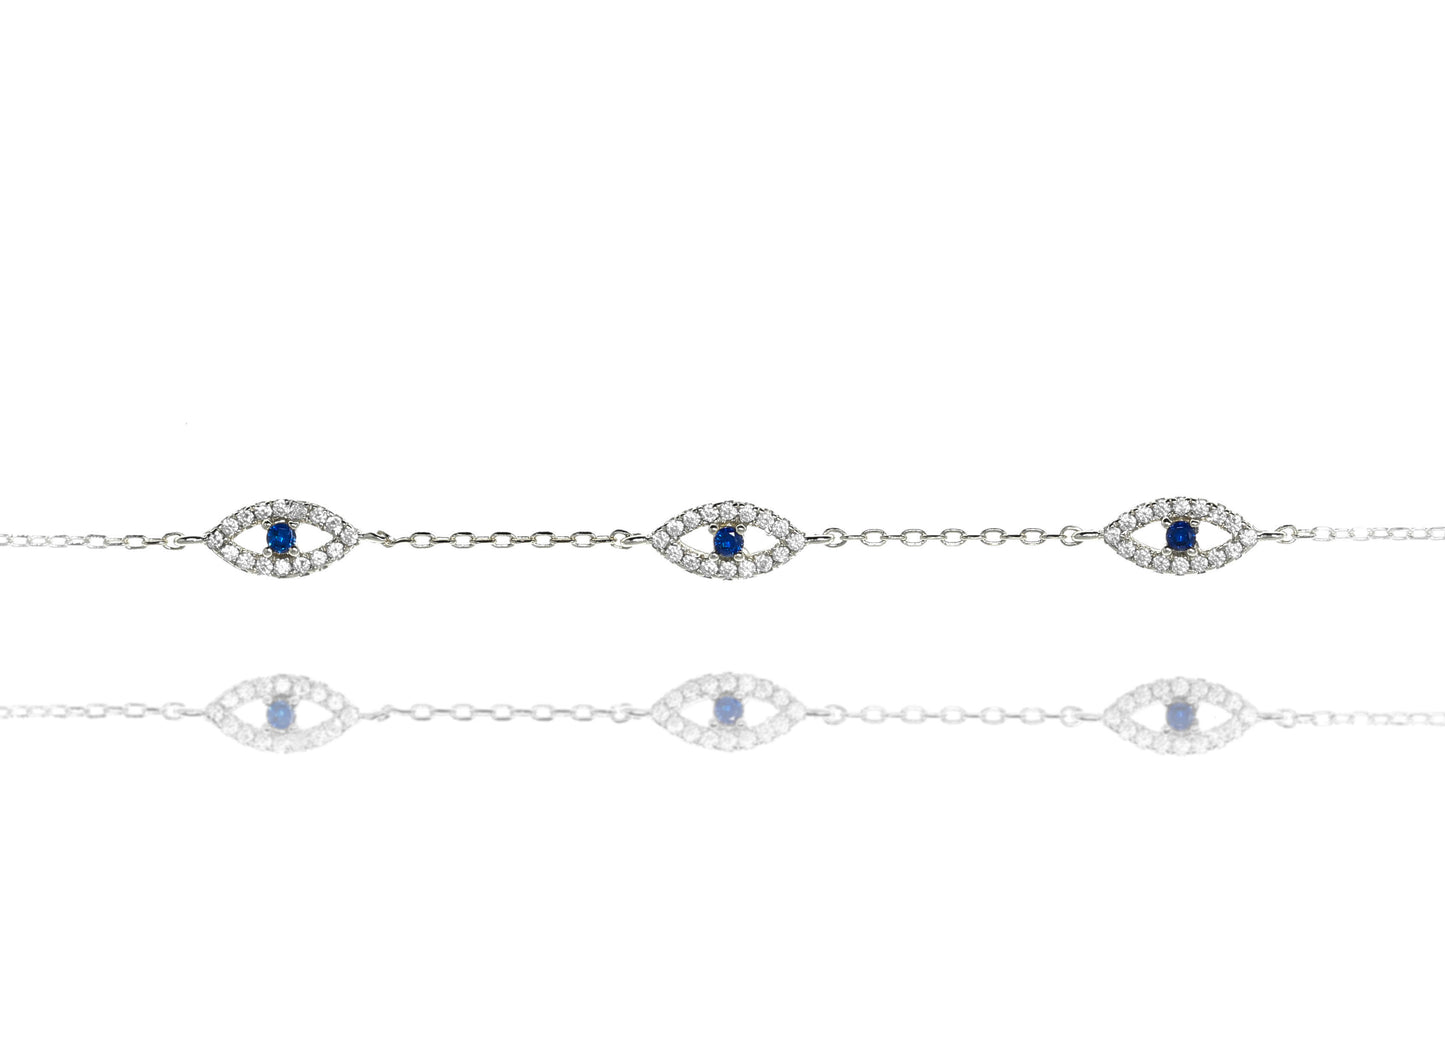 BF-9/SB - Chain and Evil Eye Bracelet with Blue Stone